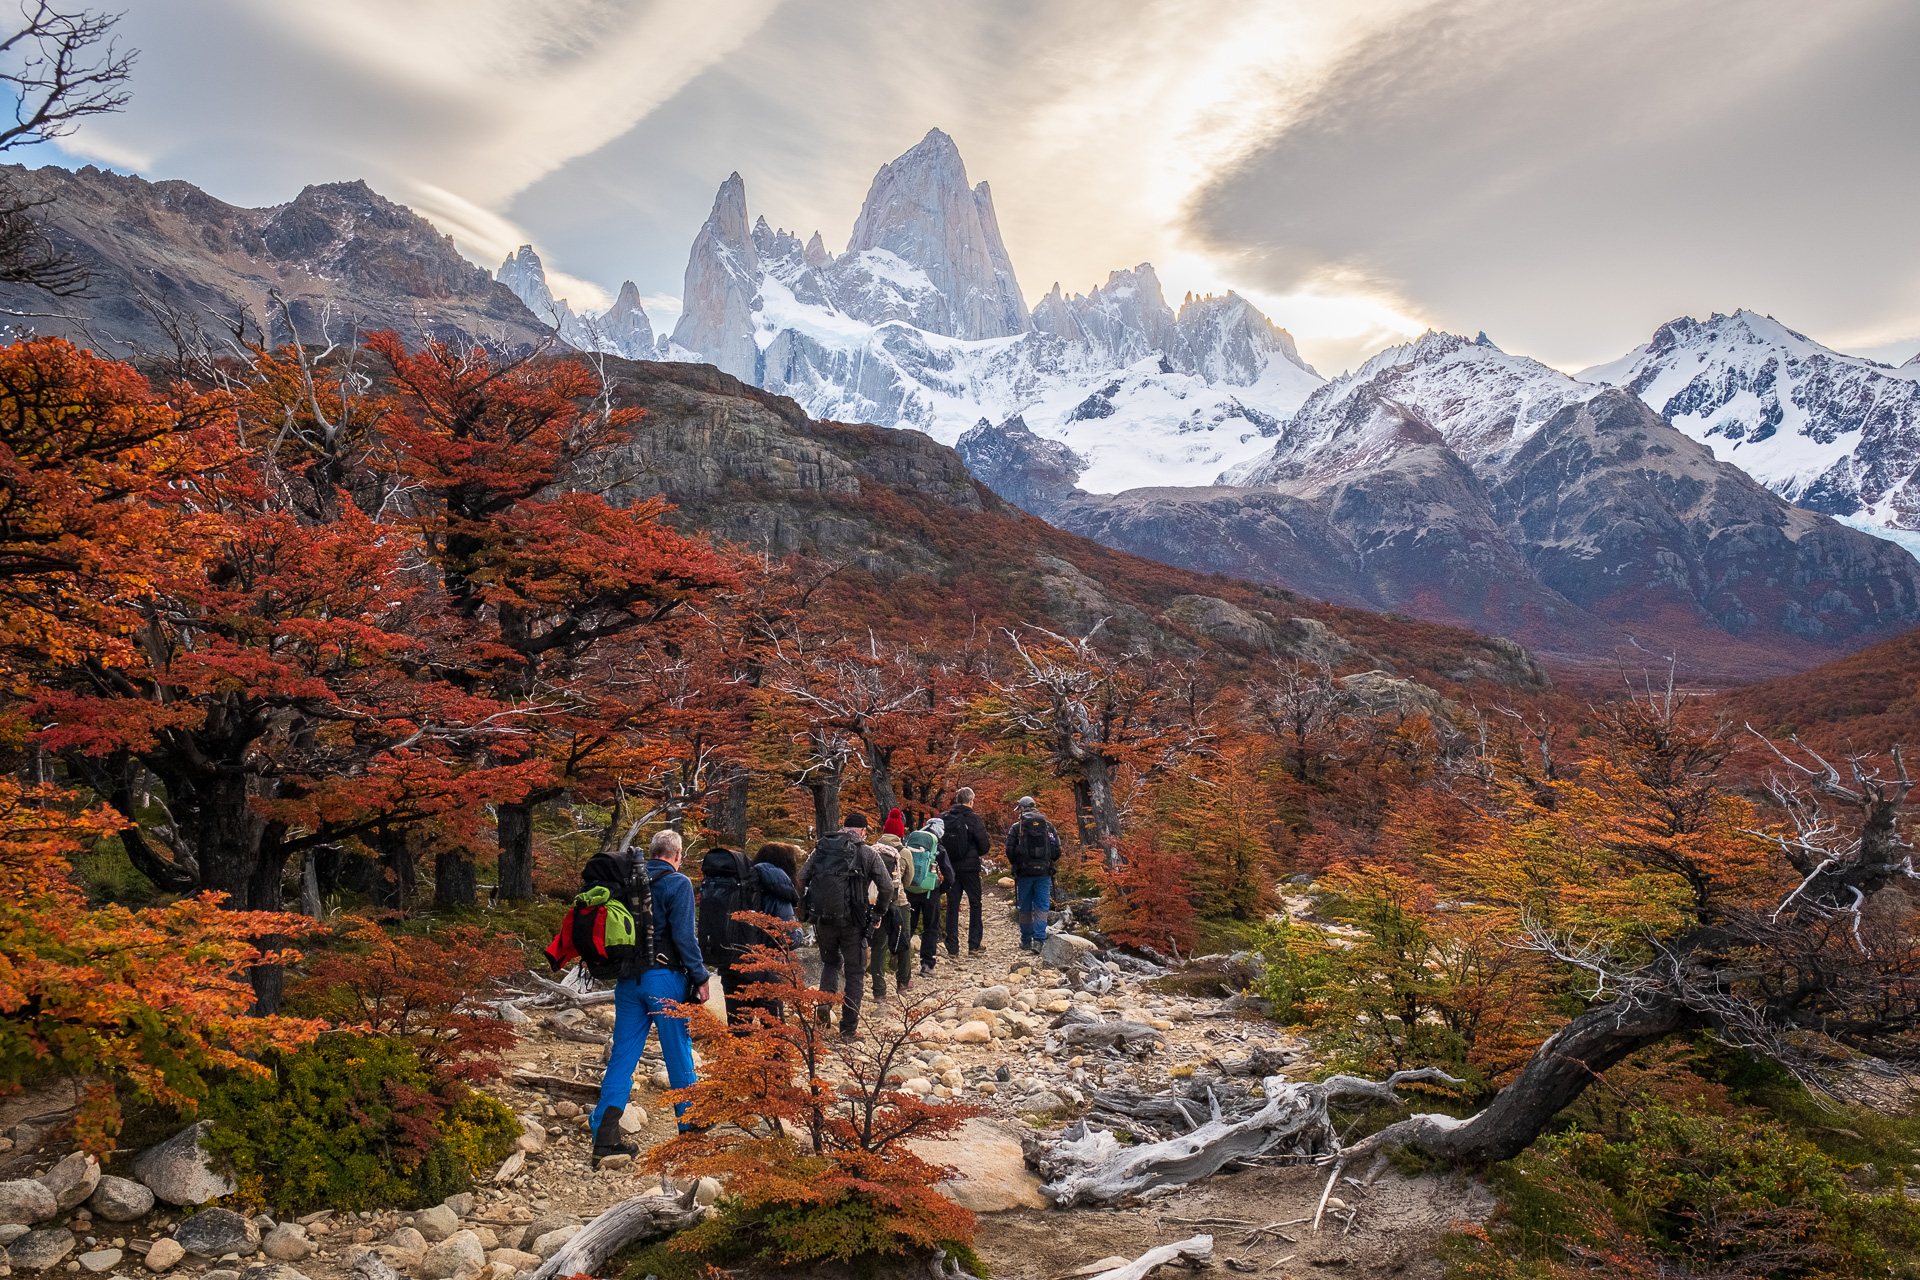 Trekking under Fitz Roy mountain range with fall colors.